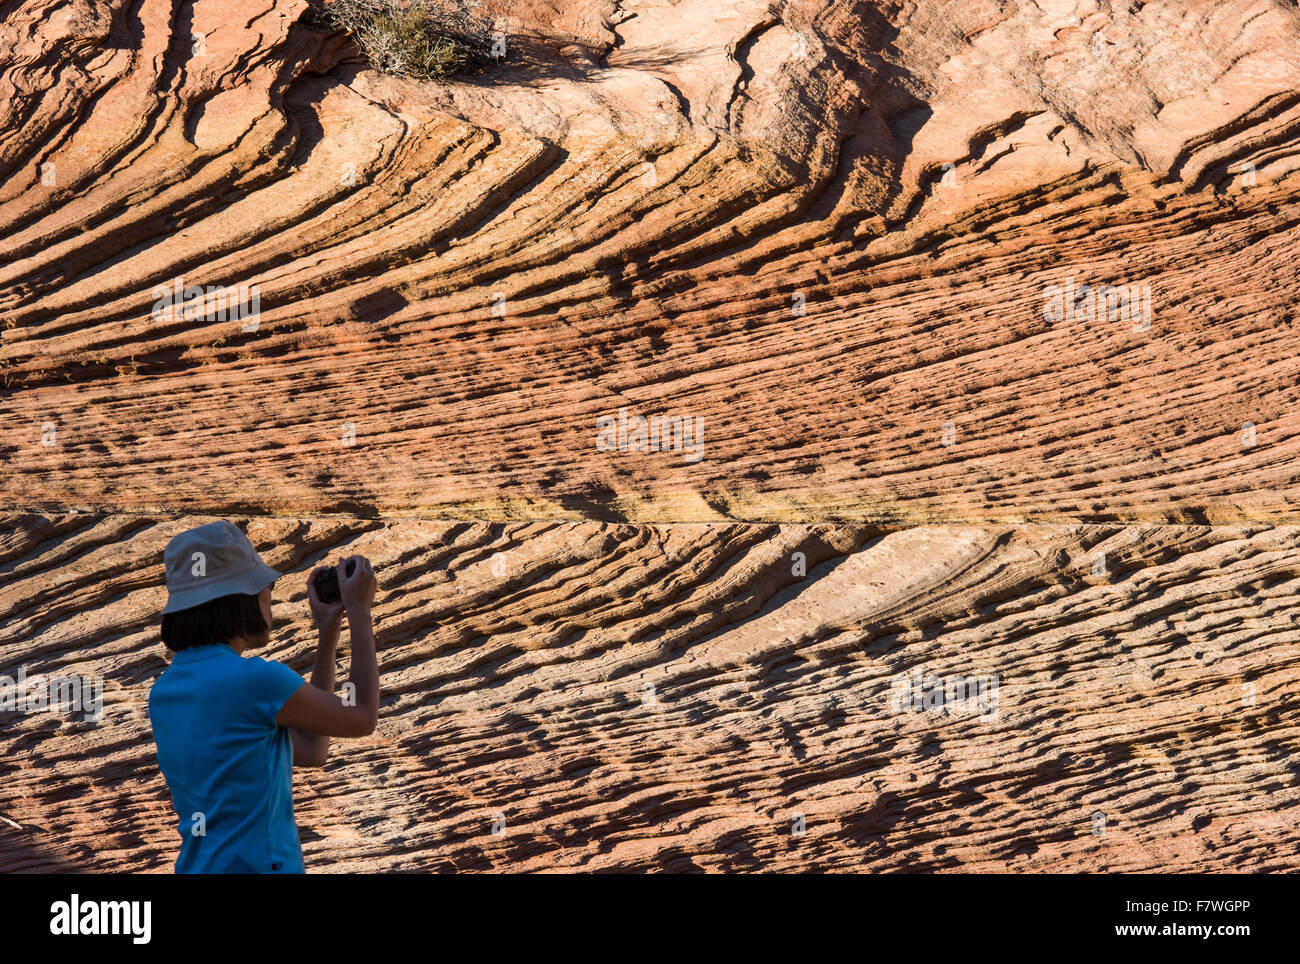 Woman photographing, Zion National Park, Utah, USA Stock Photo